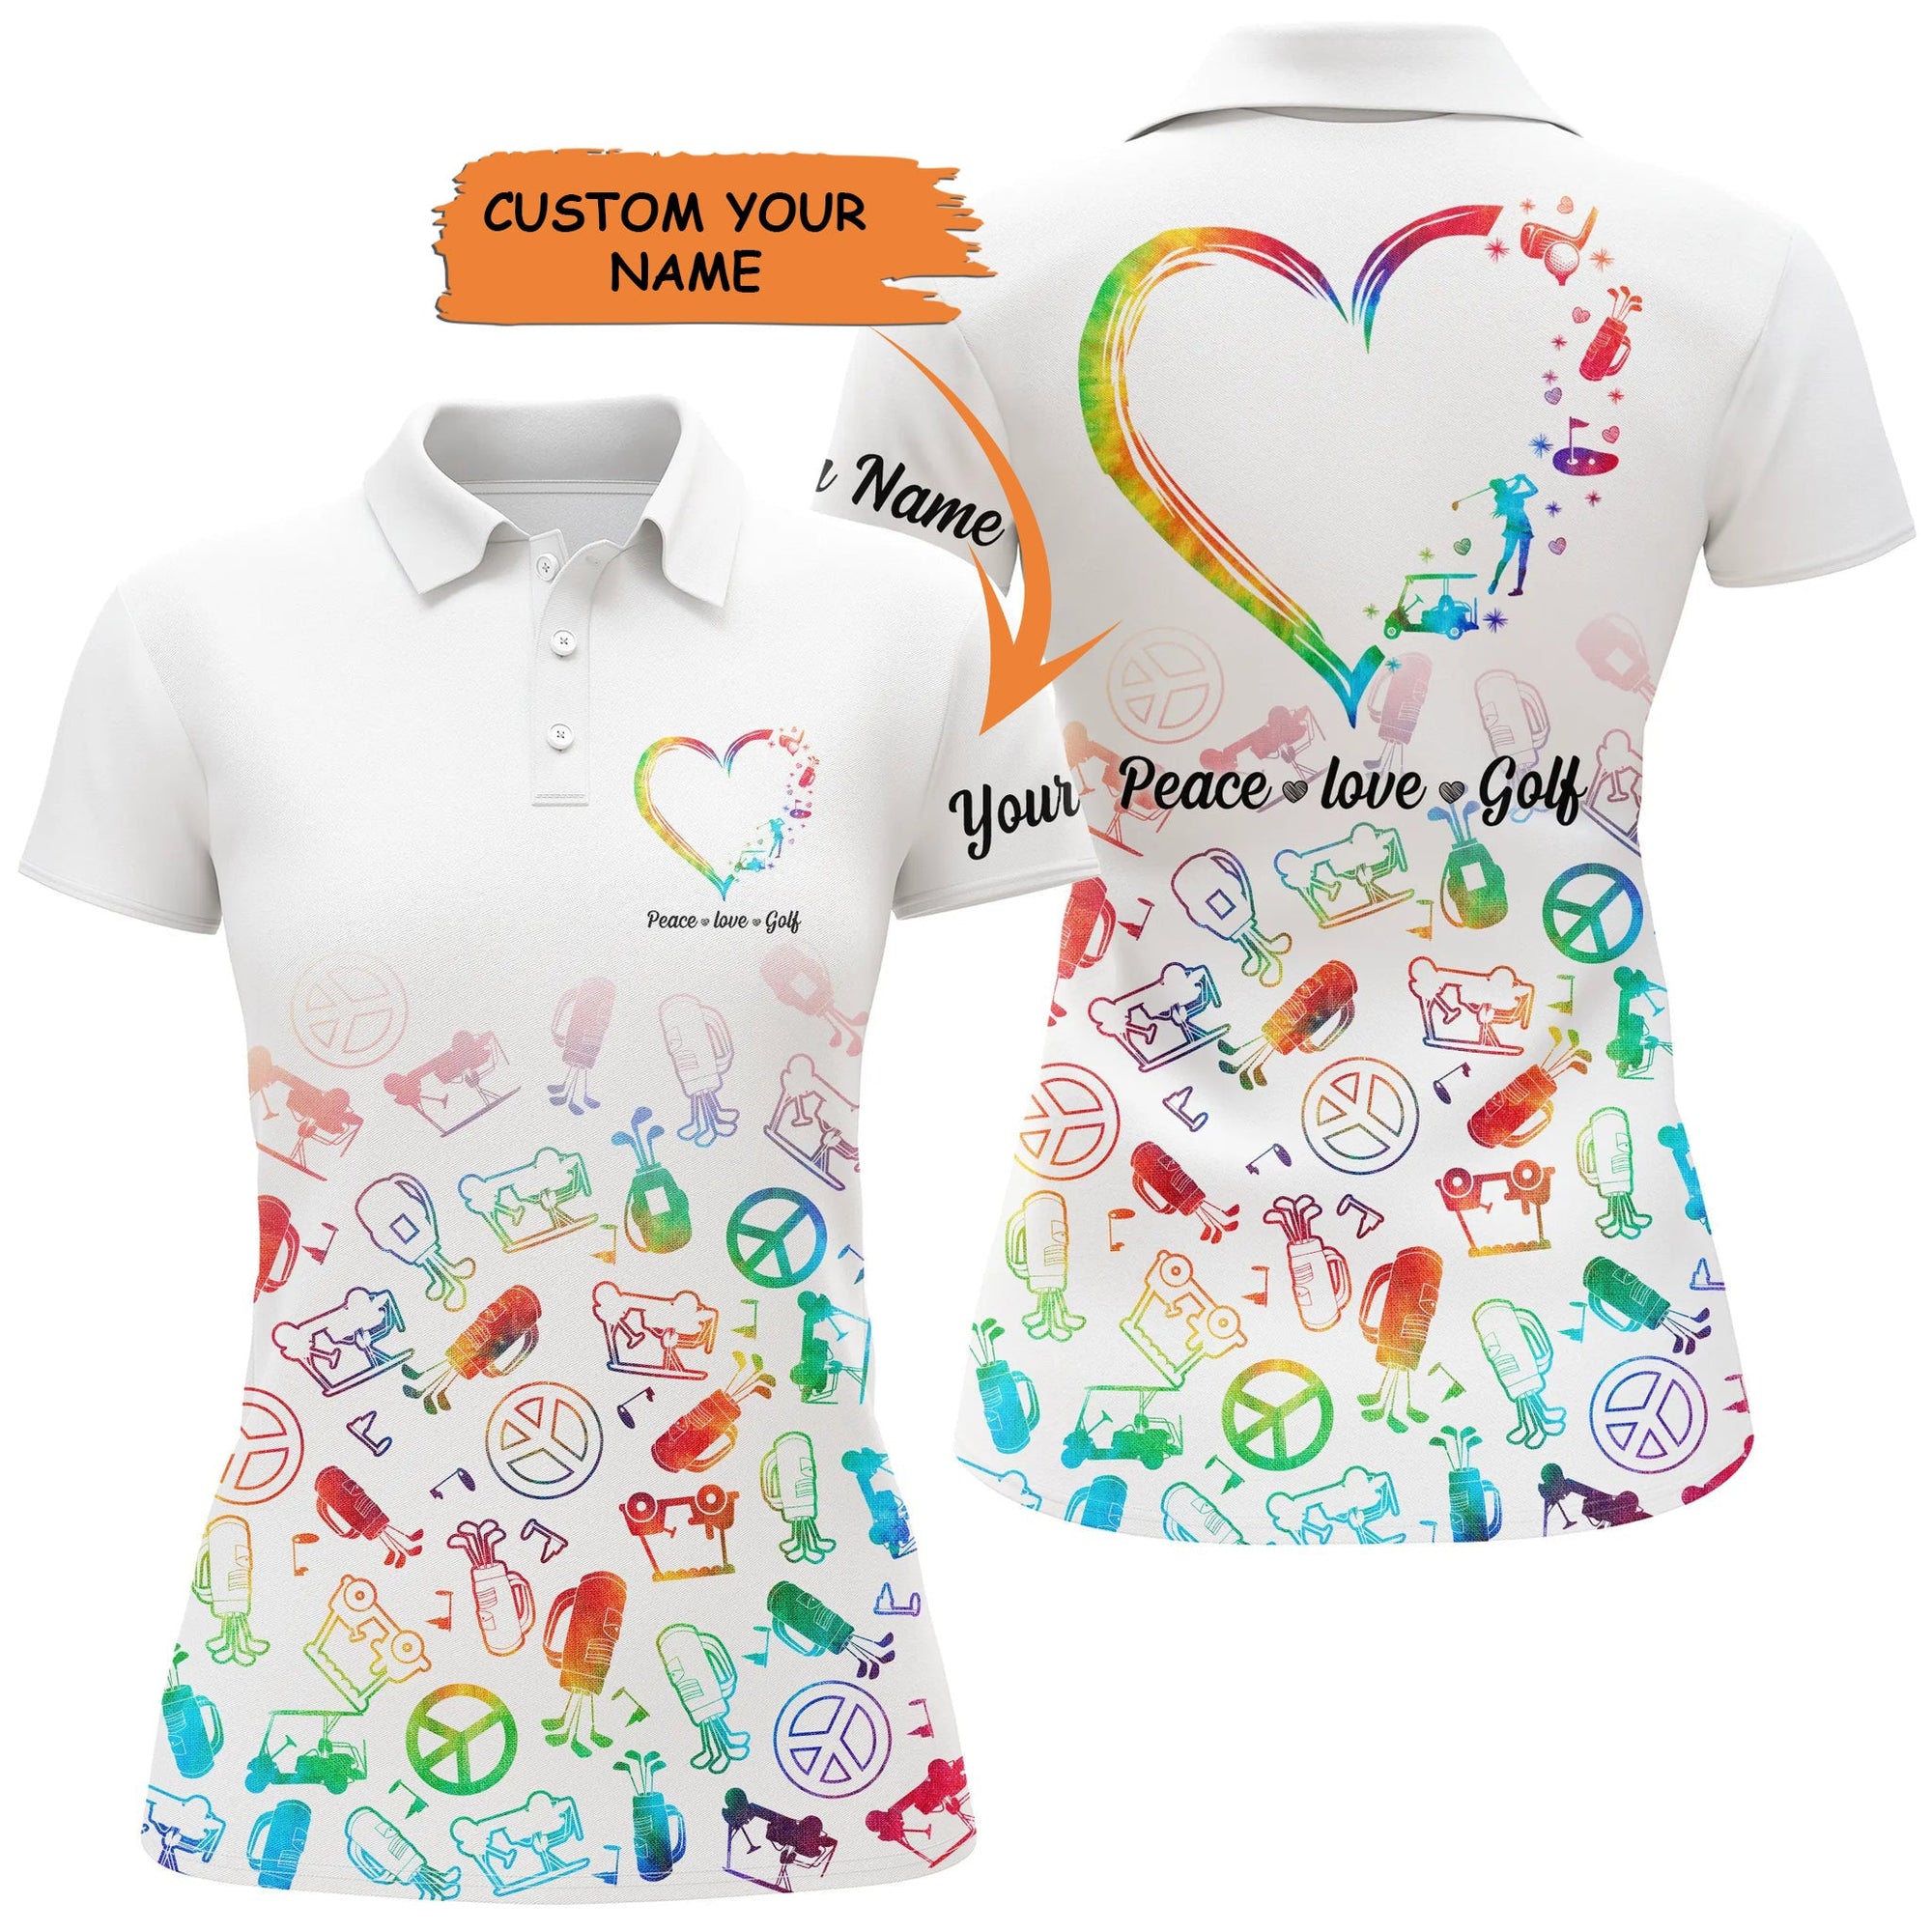 Golf Custom Name Women Polo Shirt, Watercolor Peace Love Golf Personalized Apparel Women Polo Shirts, Golf Tops, Gift For Ladies, Golf Lovers, Golfers